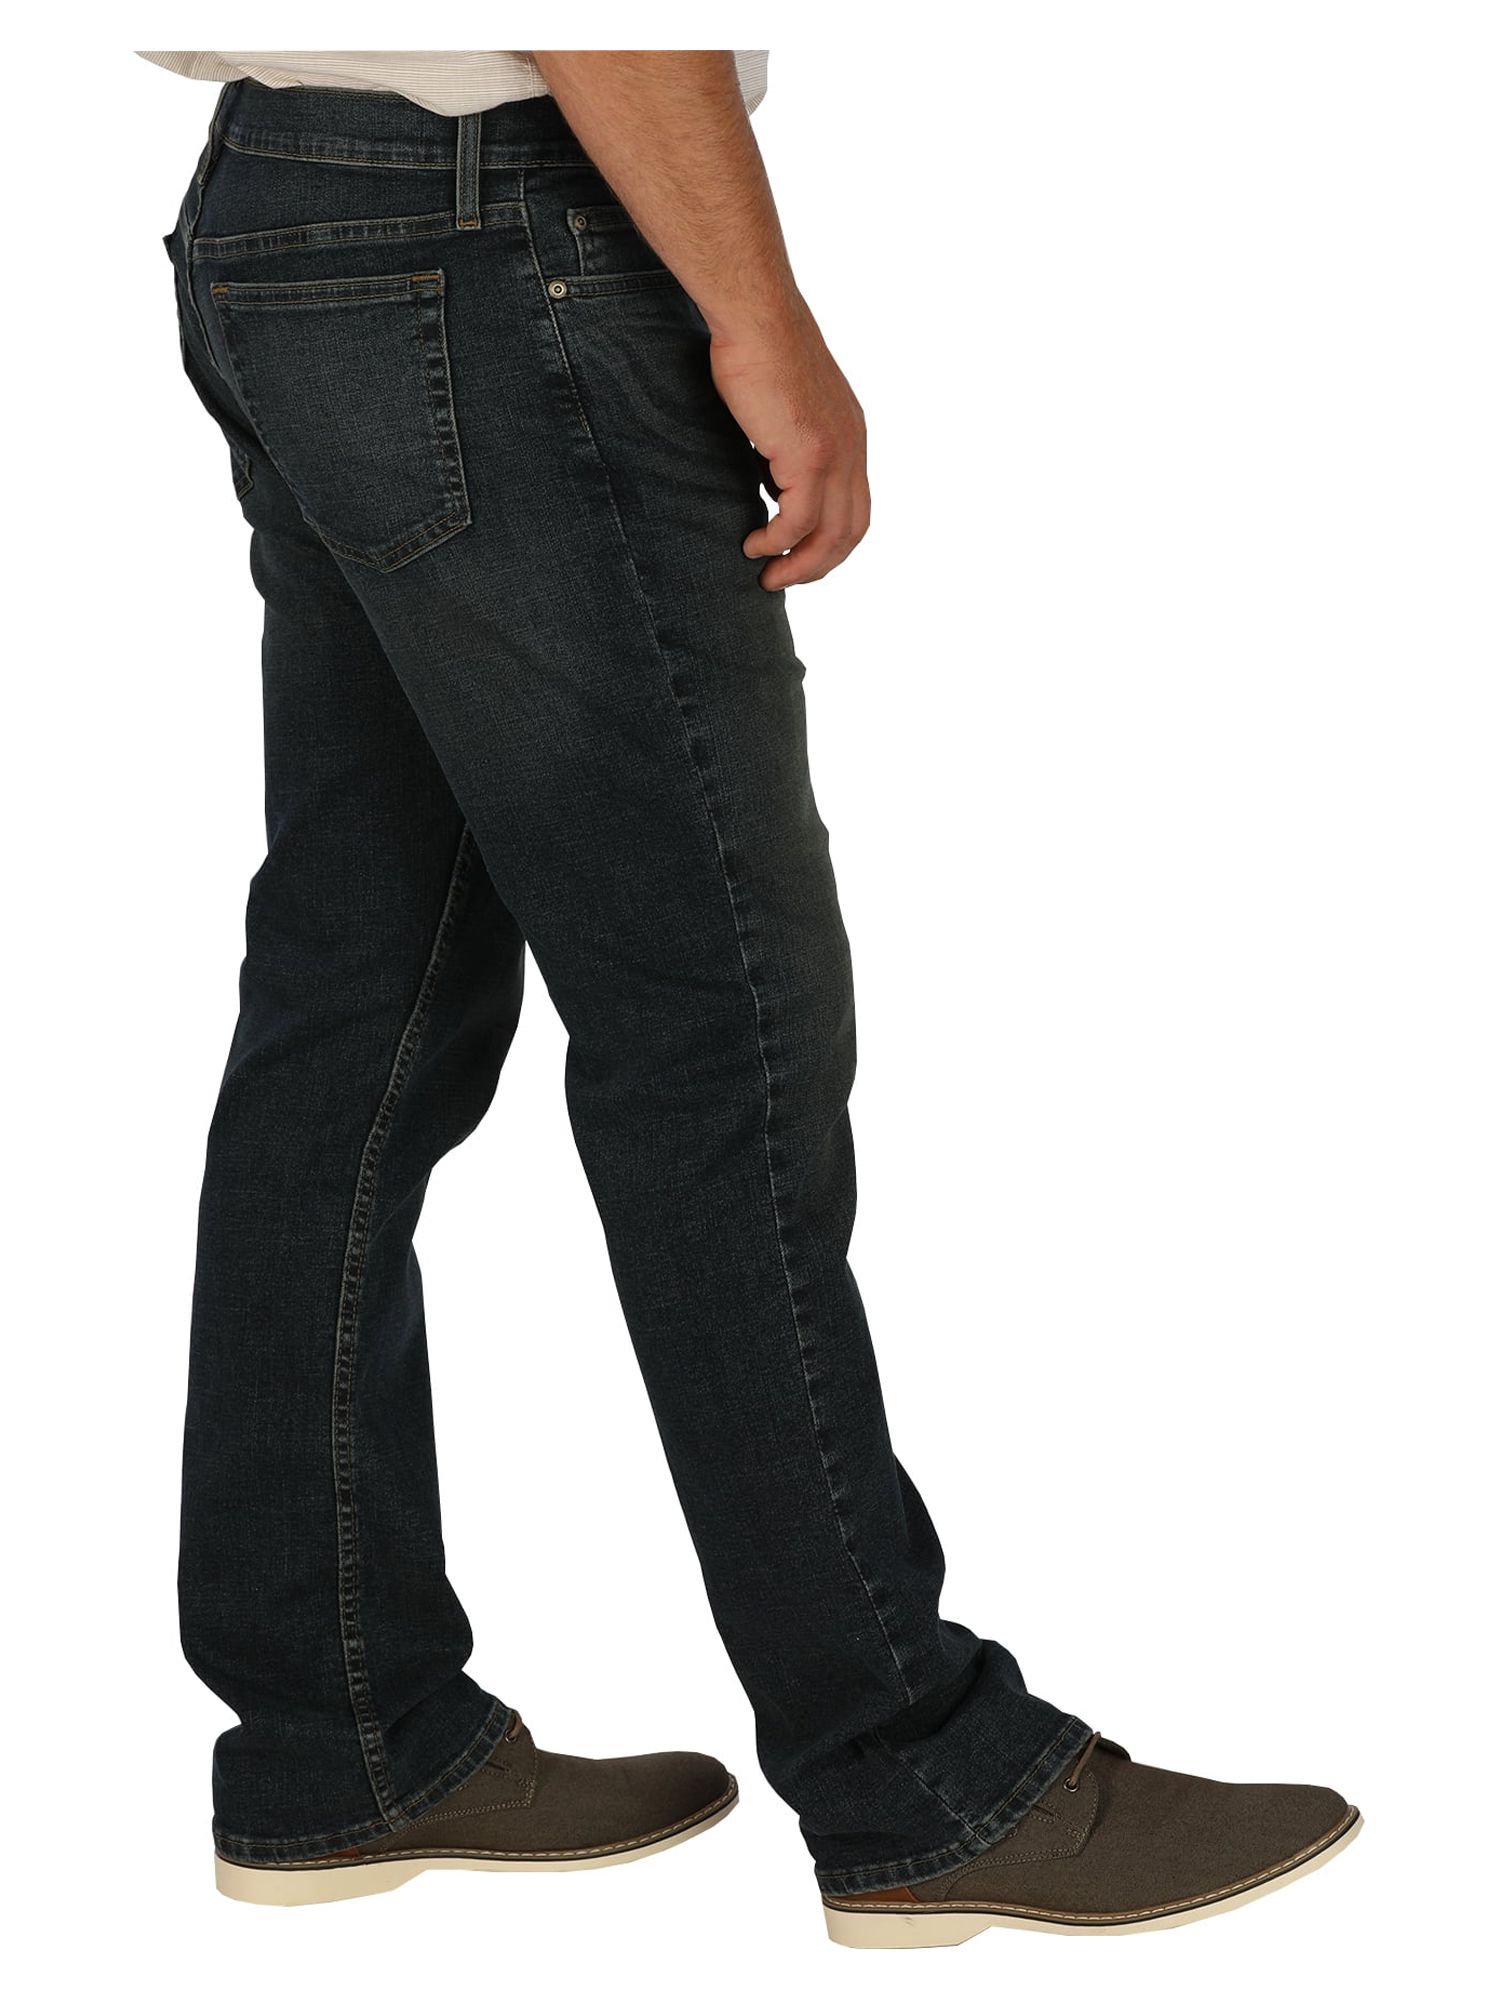 George Men's Bootcut Jeans - image 5 of 6